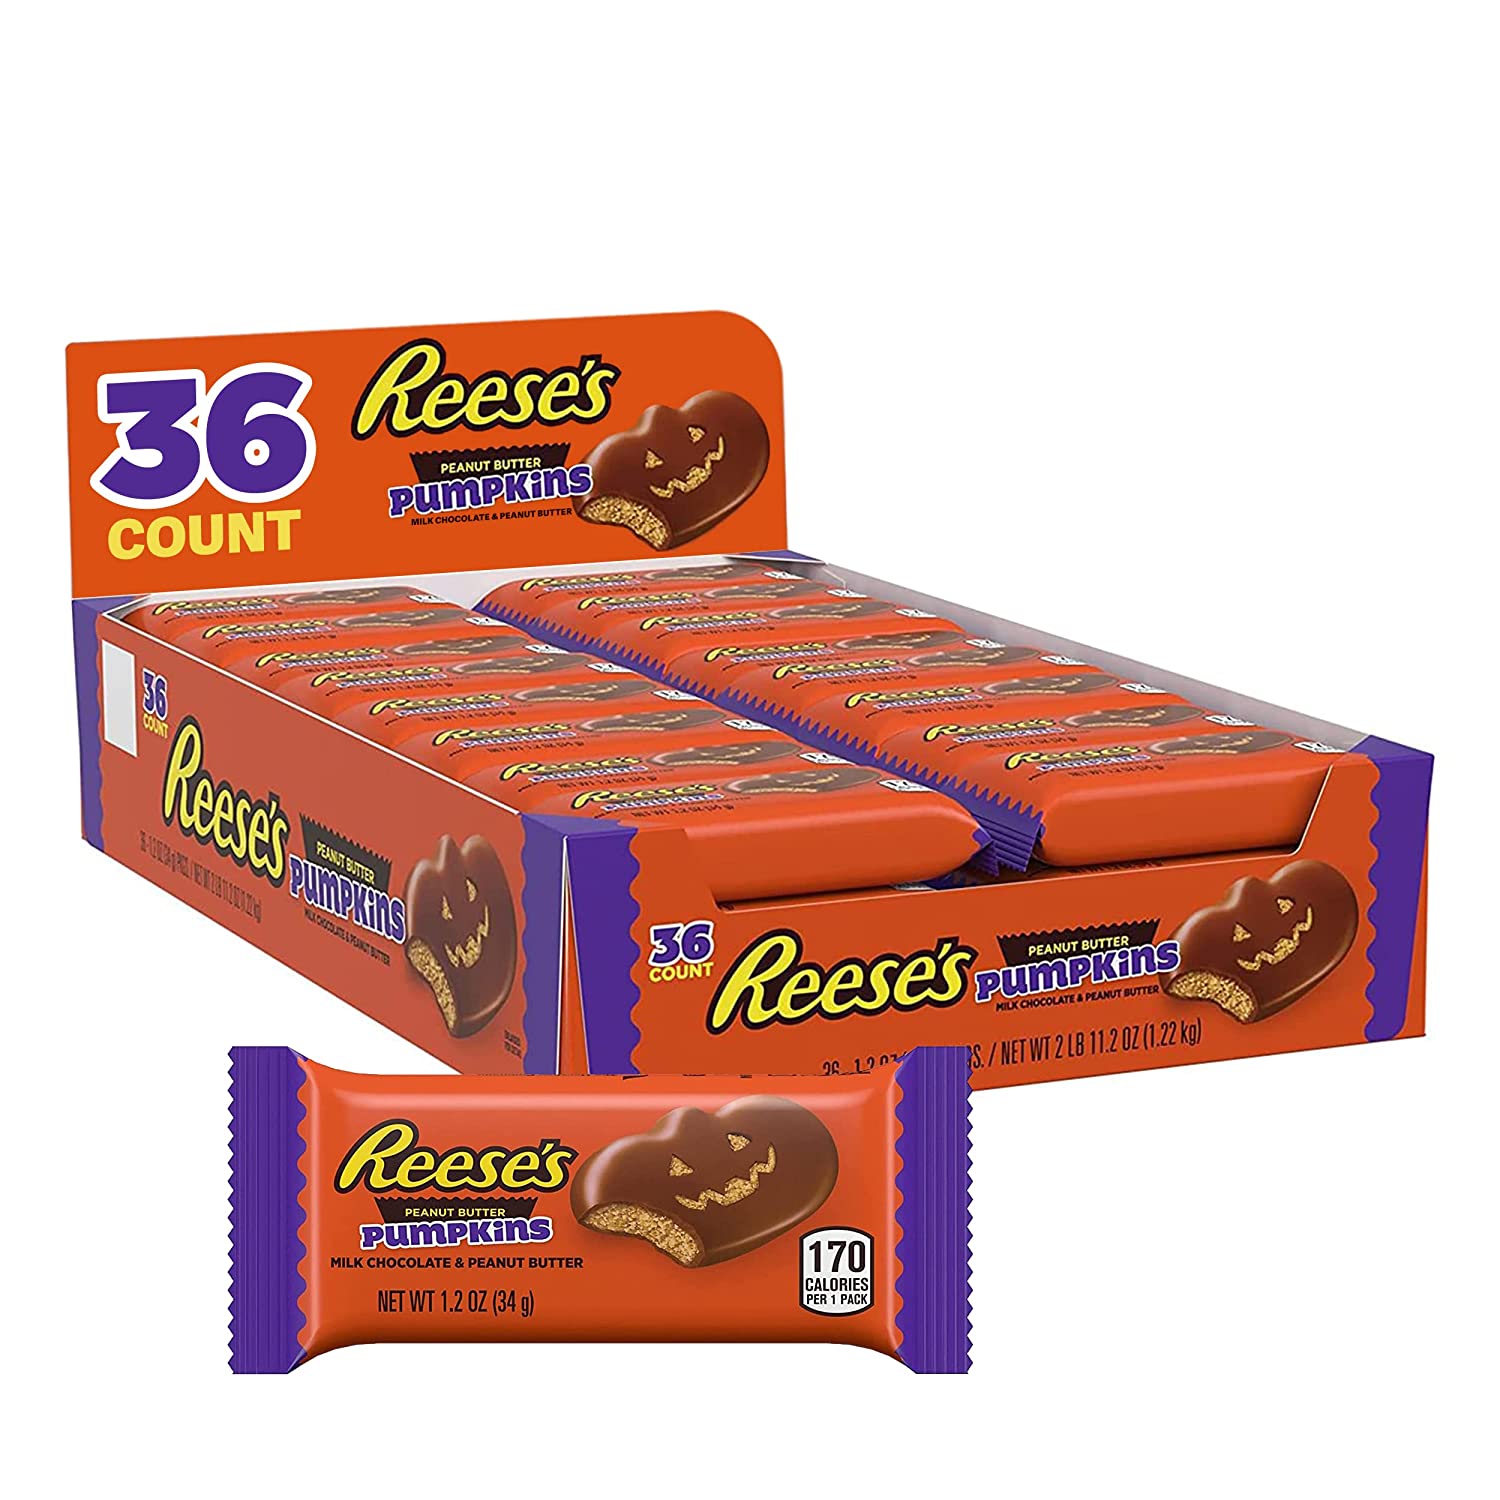 Coming soon: Reese's Cups, chocolate bars made from plants – Twin Cities